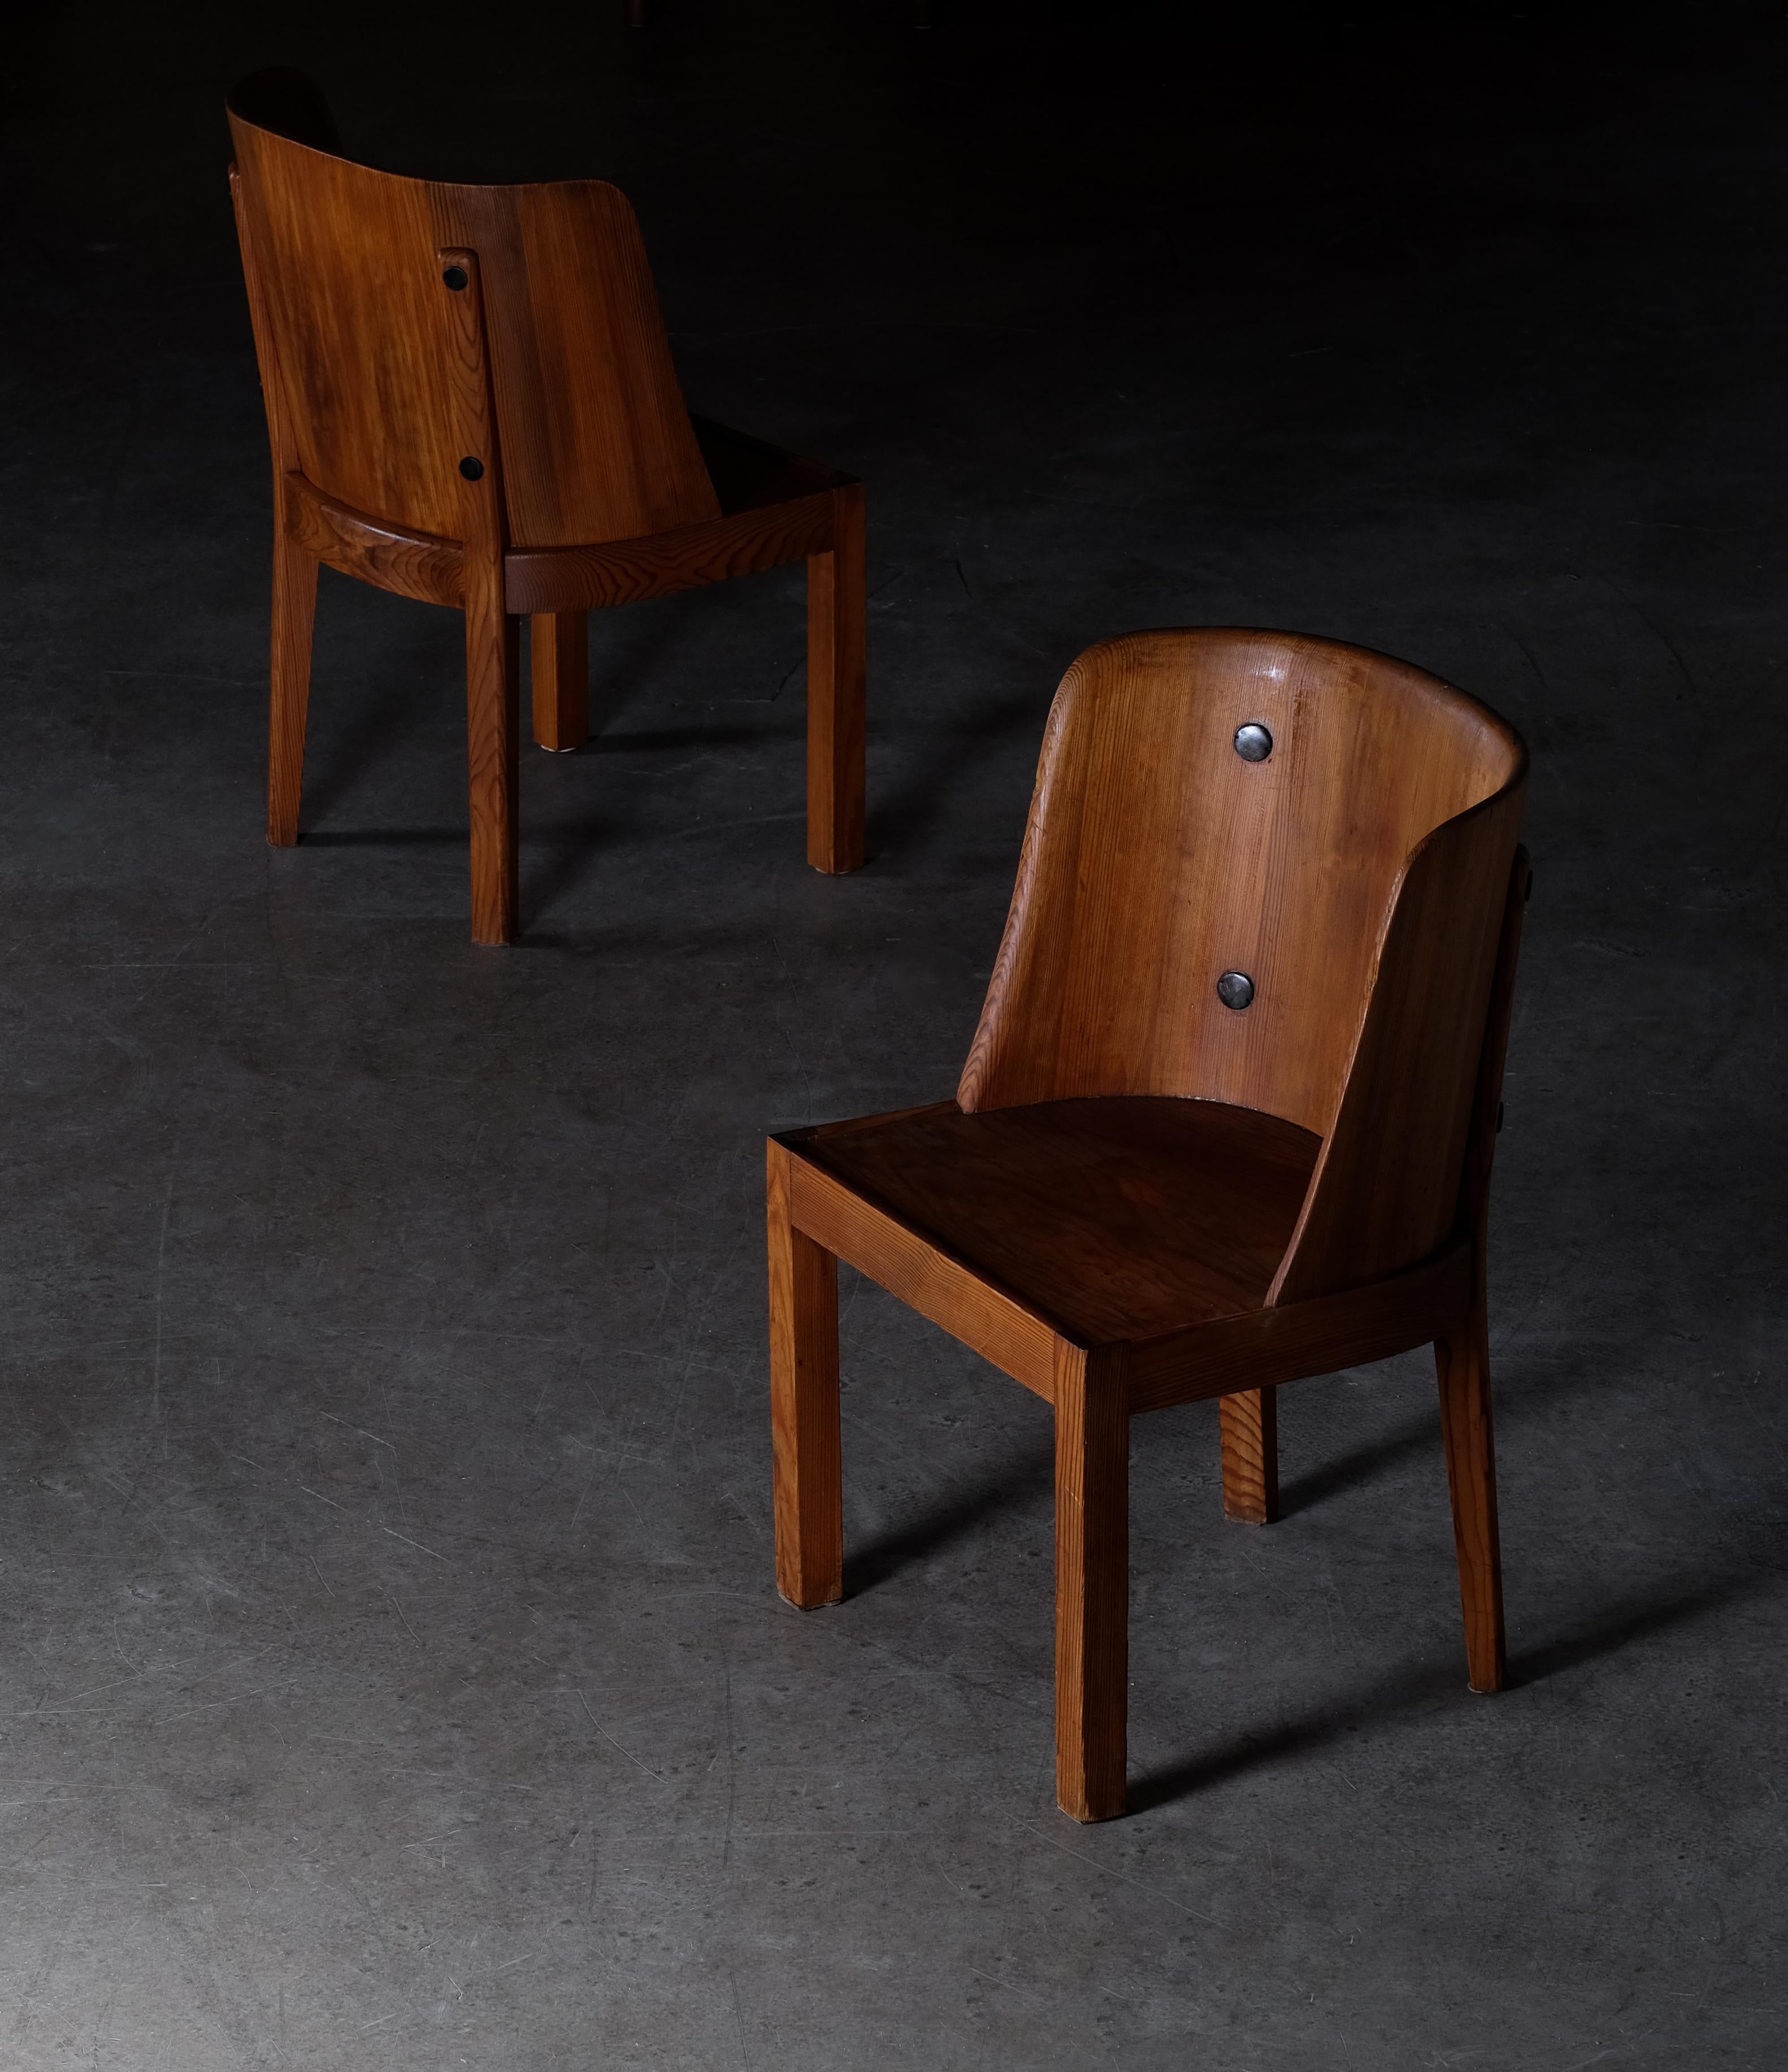 Rare pair of low back 'Lovö' chairs by Axel-Einar Hjorth. Produced by Nordiska Kompaniet, 1930s.